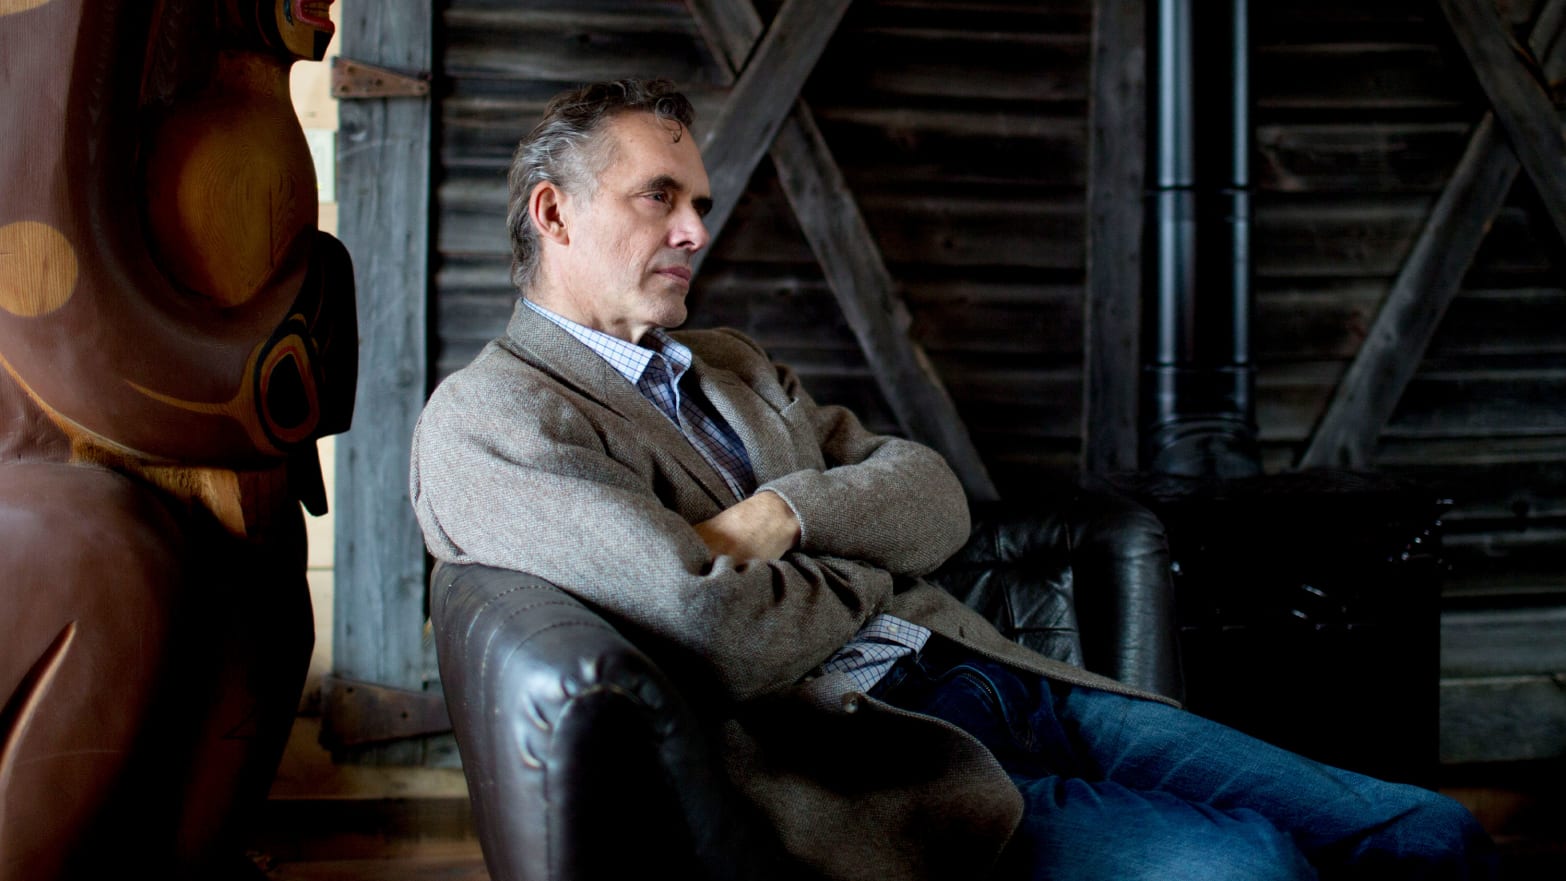 Jordan Peterson: the man they couldn't cancel